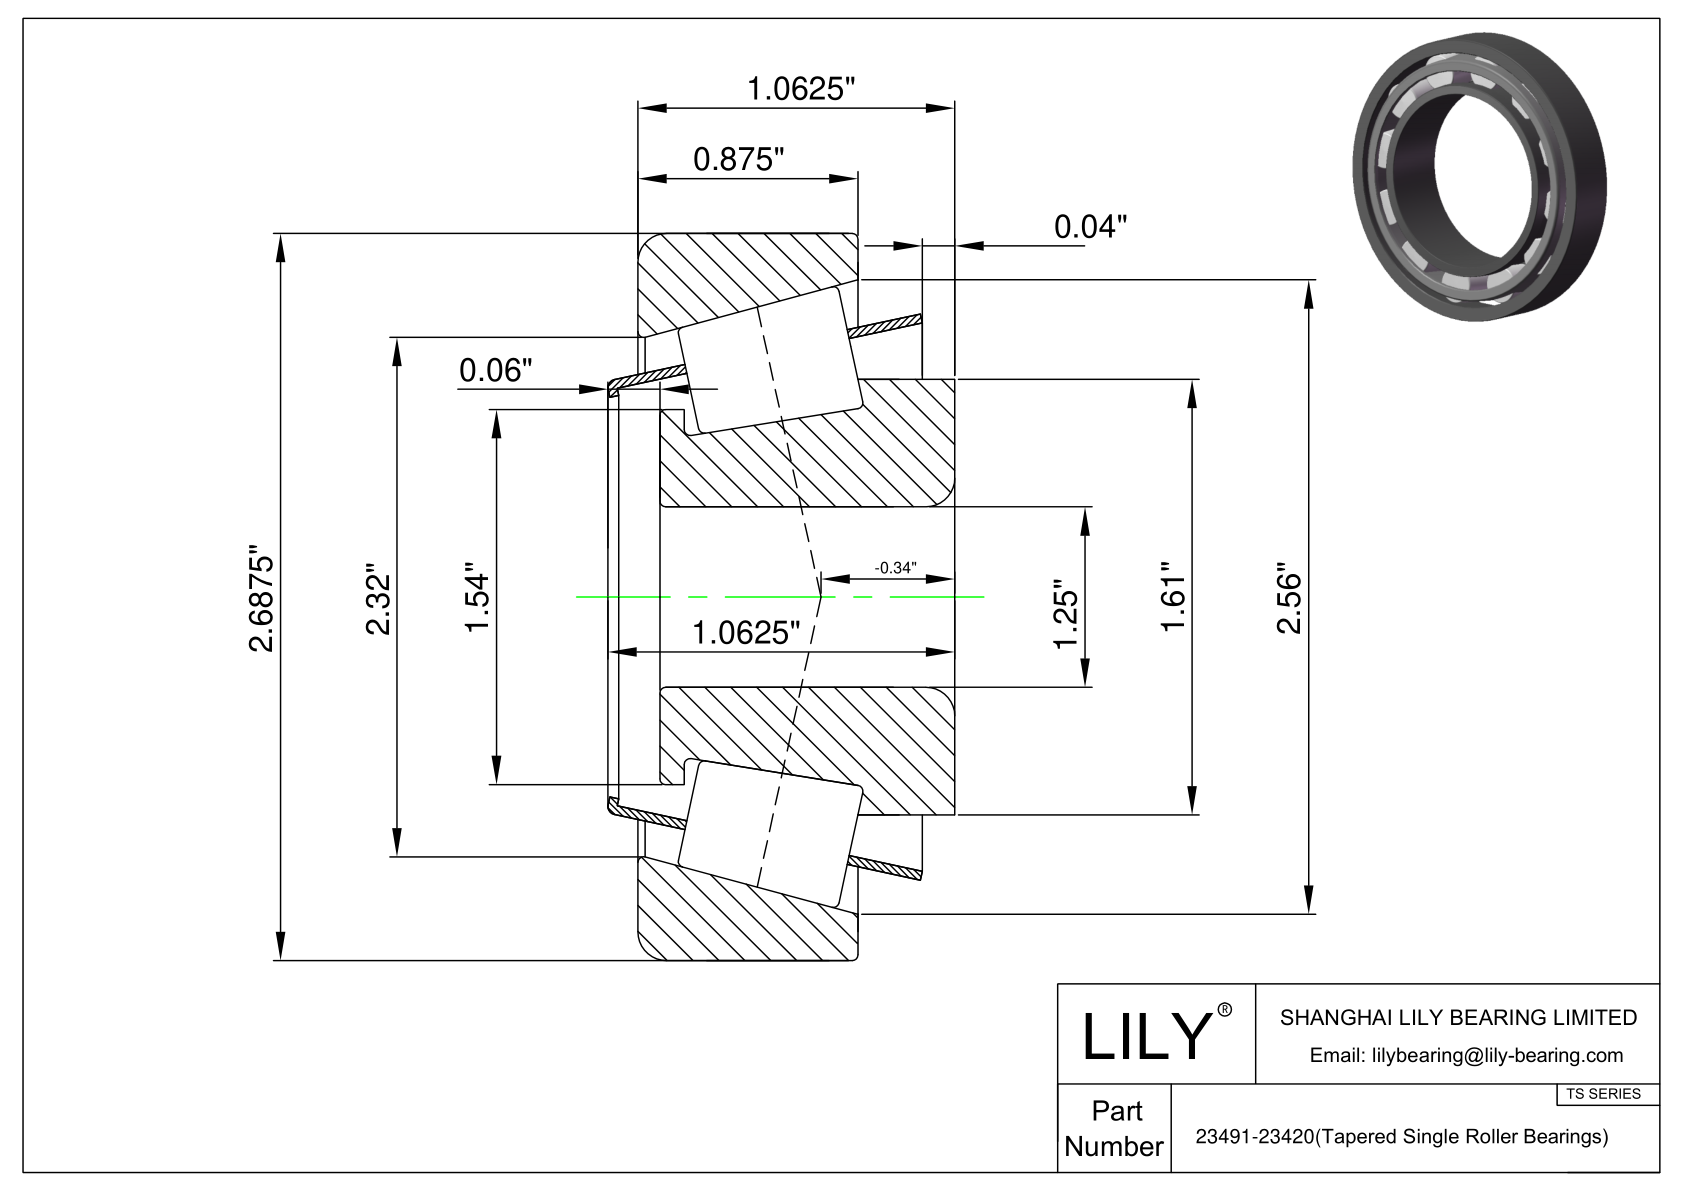 23491-23420 TS (Tapered Single Roller Bearings) (Imperial) cad drawing